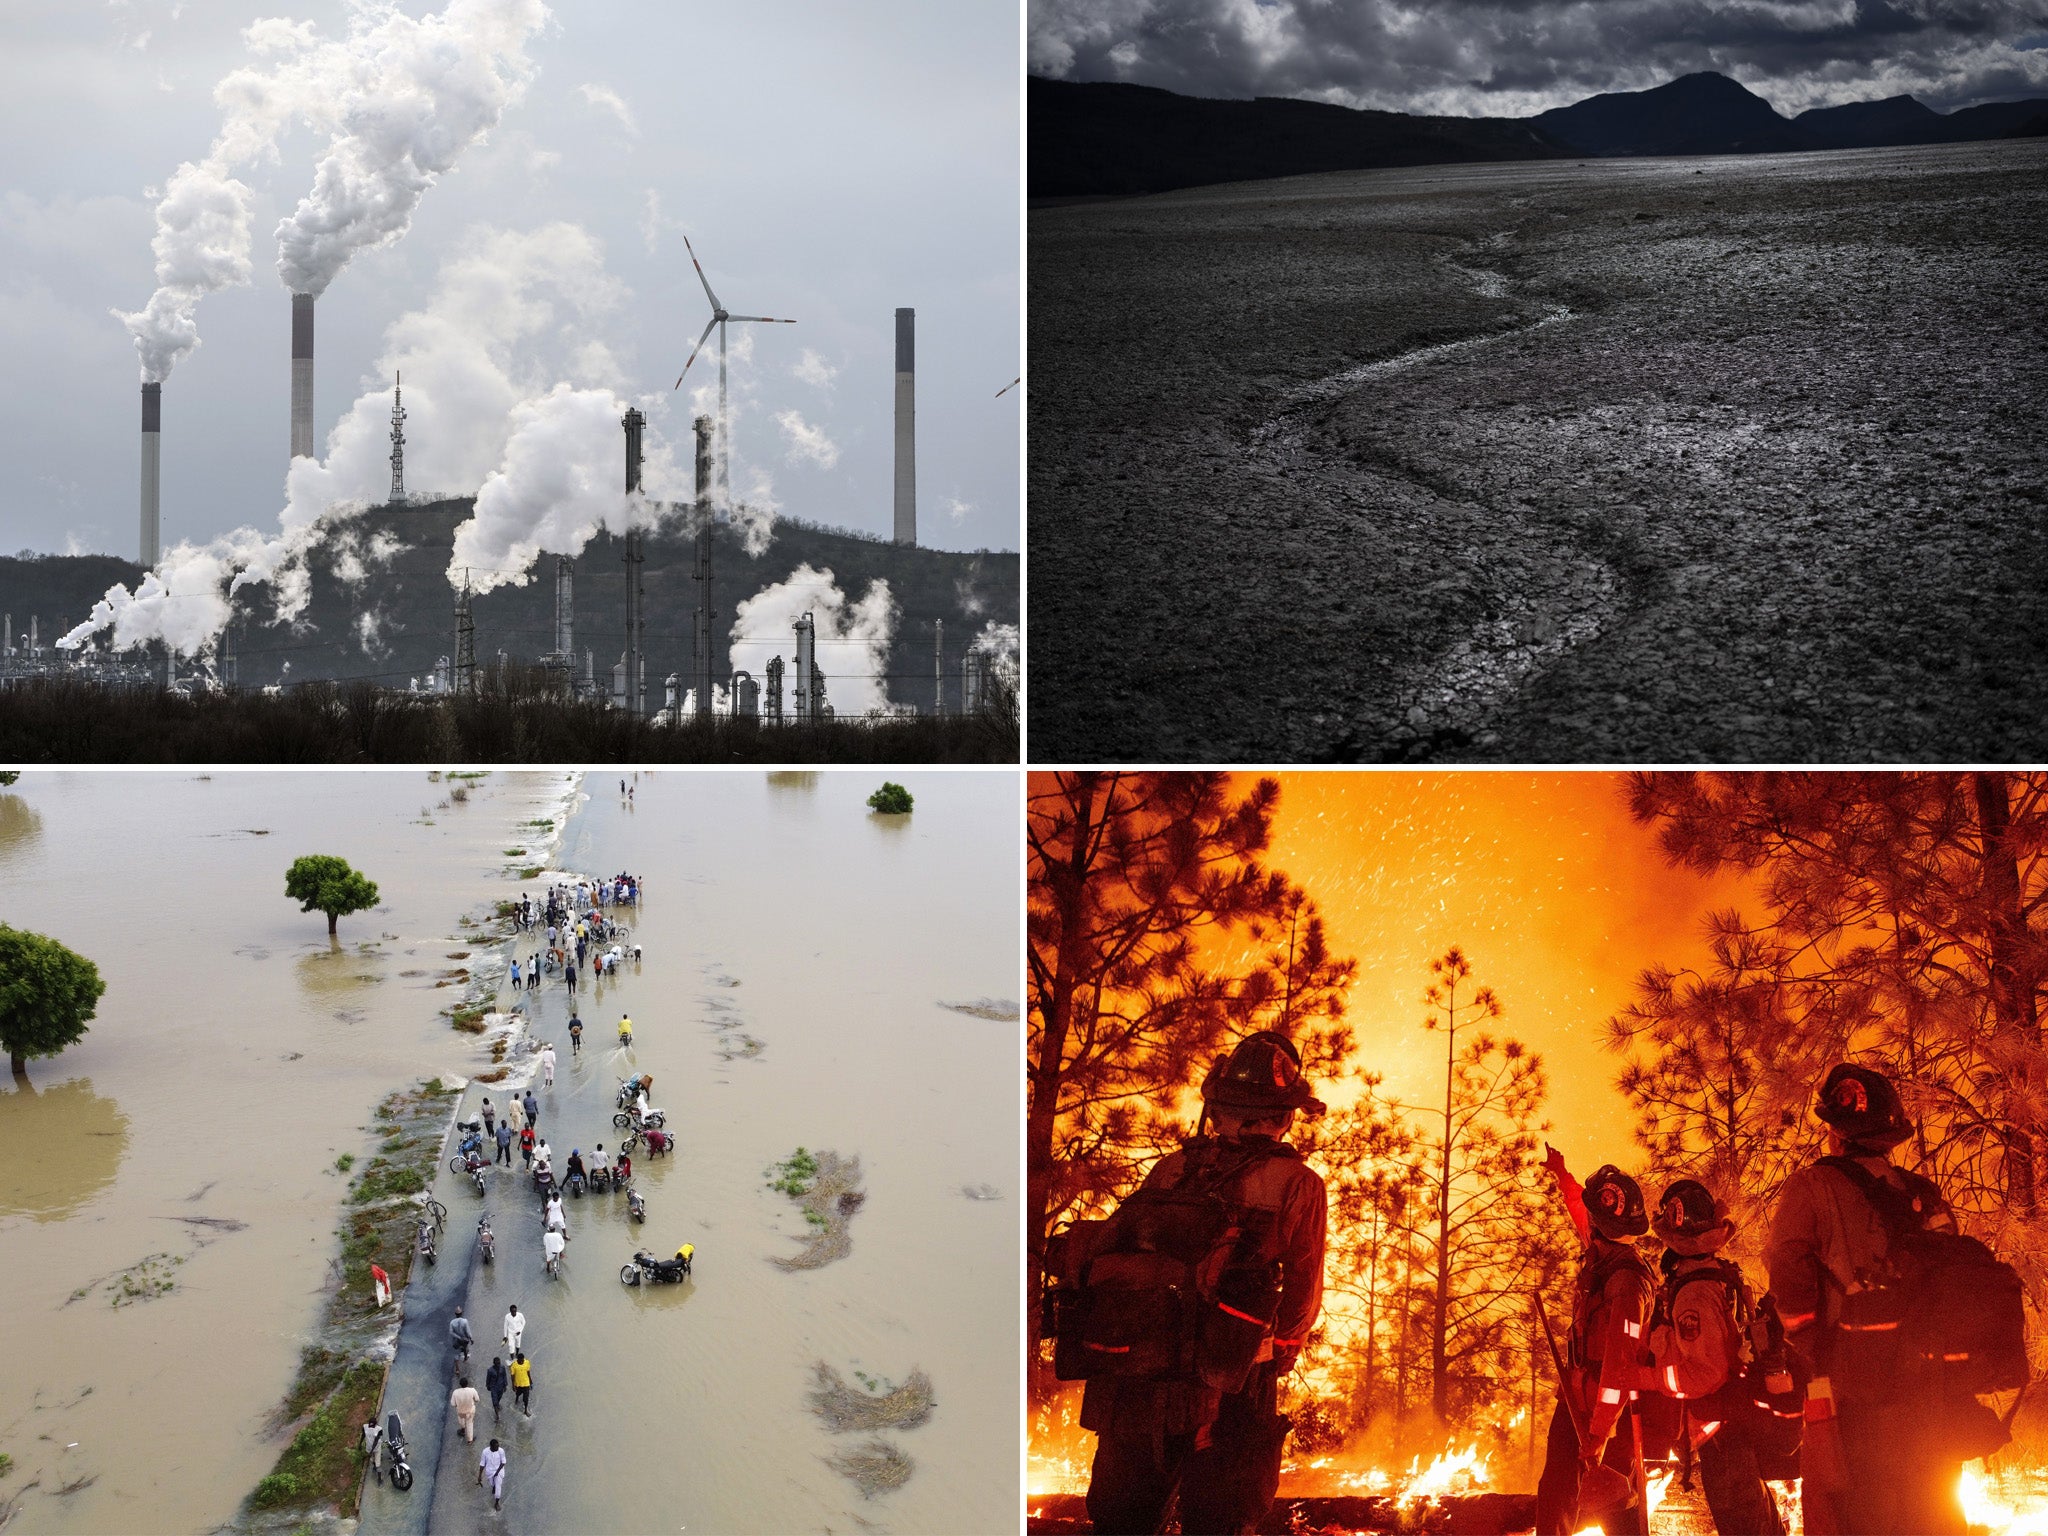 From top left, clockwise: An oil refinery and coal plant in front of wind turbines in Germany; drought-ravaged Lake Serre-Poncon, southern France; crews battle a wildfire in California in September 2022; people walk through floodwaters after heavy rainfall in Hadejia, Nigeria, September 2022